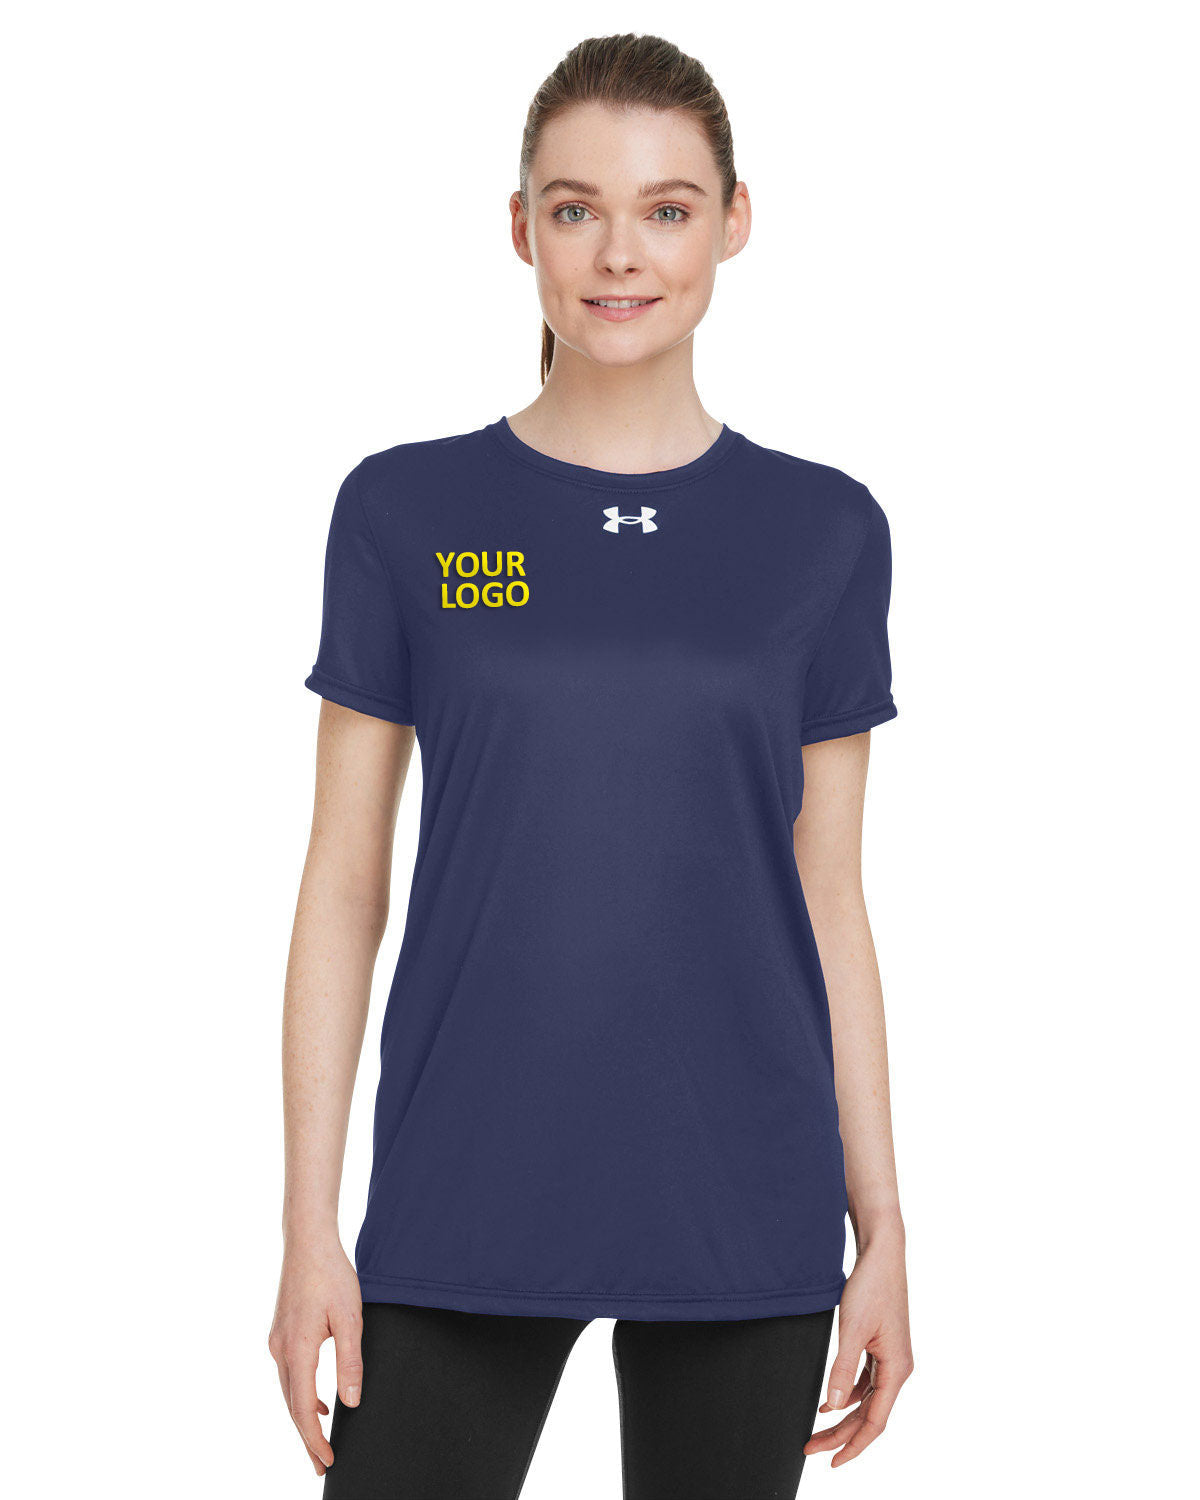 Under Armour Ladies Tech Branded T-Shirts, Navy